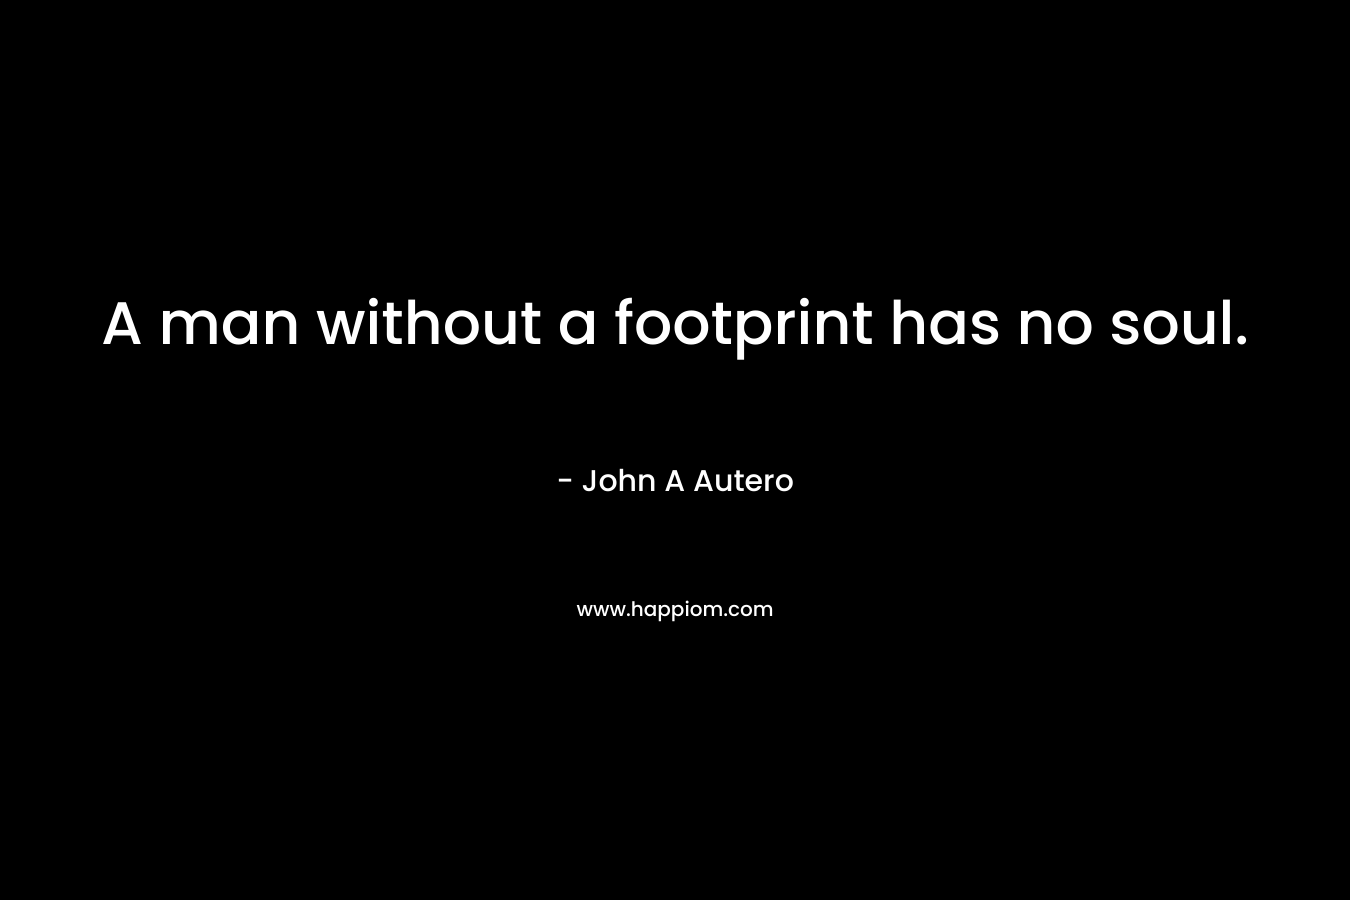 A man without a footprint has no soul.